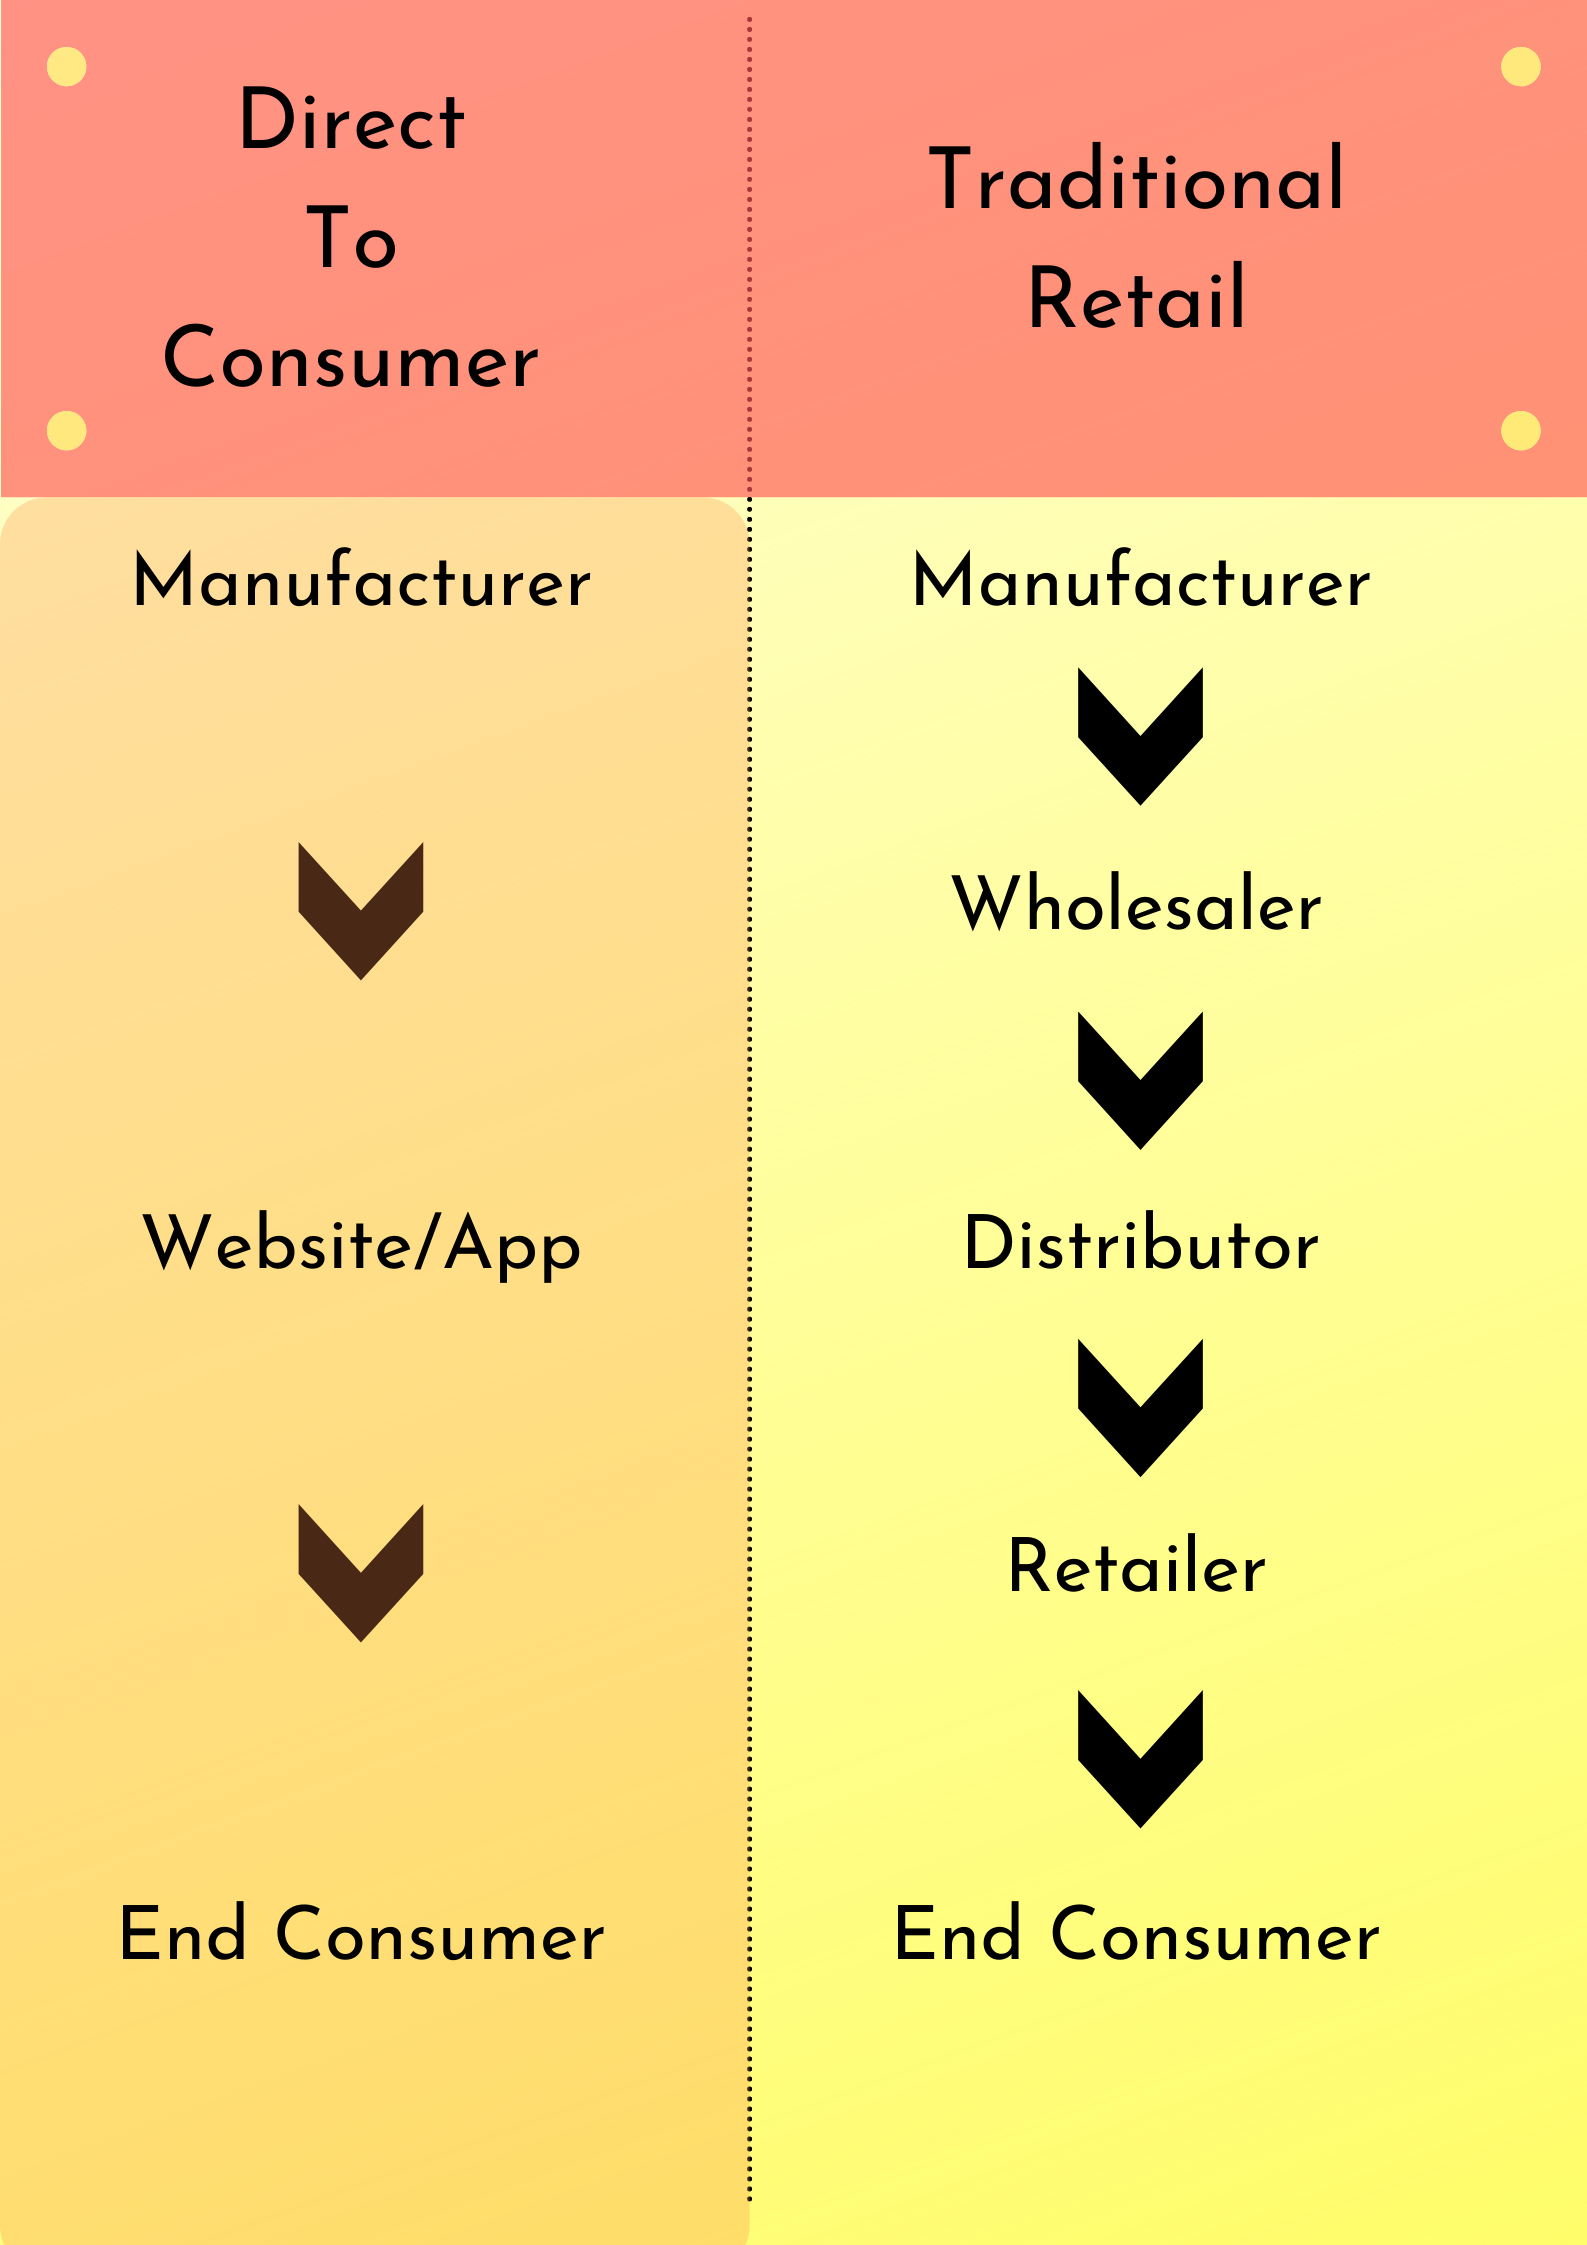 Direct to Consumer Model vs Traditional Retail